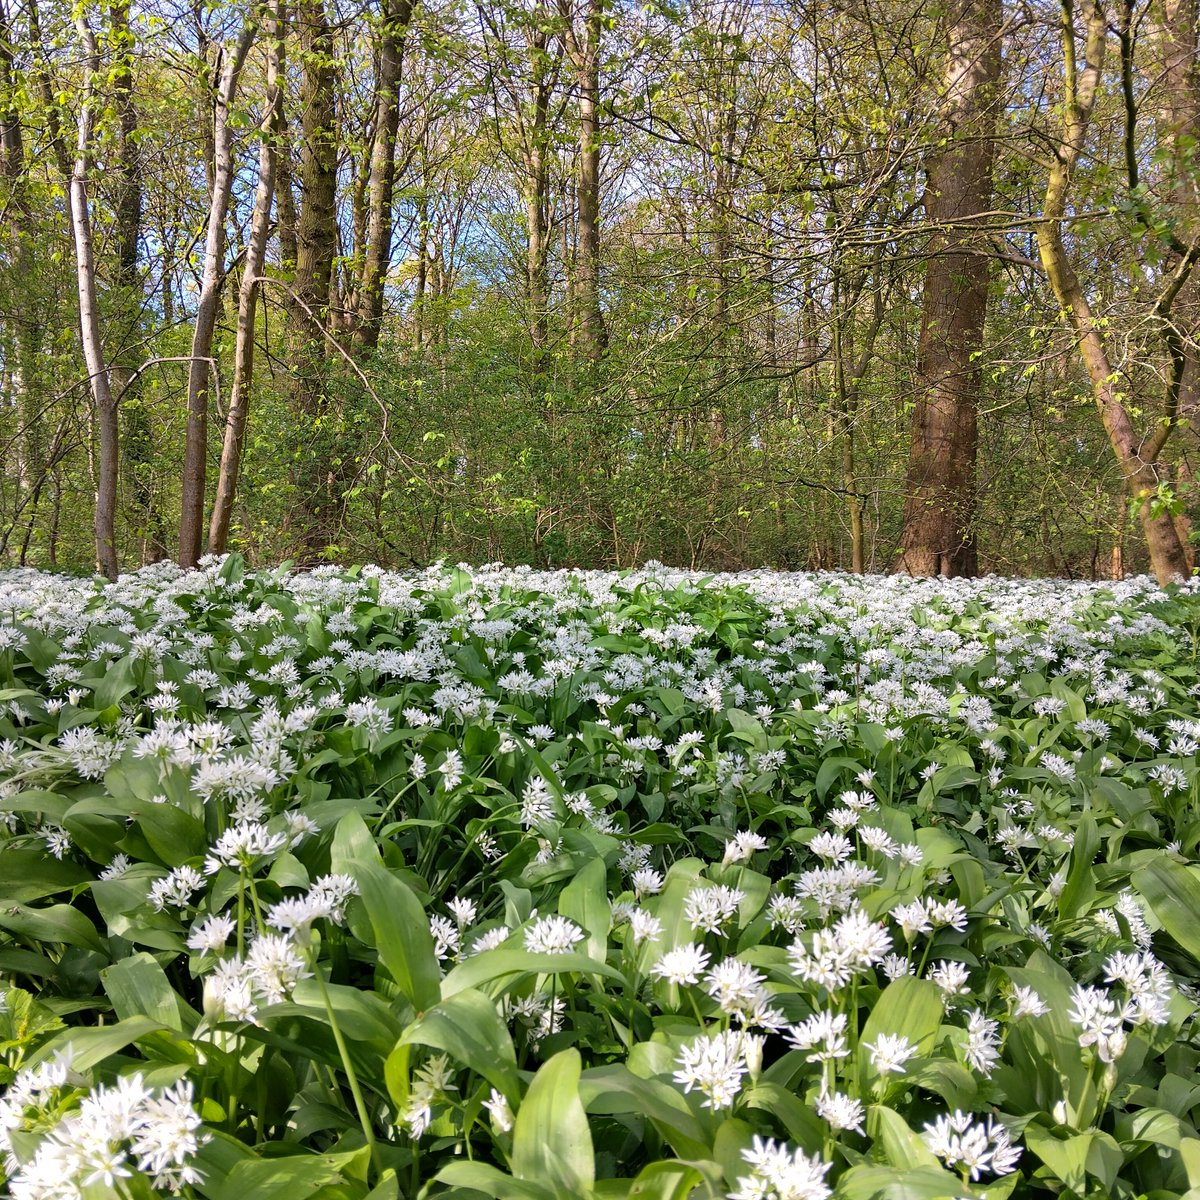 Wander along the orange estate route into Big Wood and discover incredible white carpets of wild garlic as far as the eye can see. The woodland is free to access. Admission charges apply to visit the garden and house. bit.ly/45ytDi3 #Erddig #WildGarlic